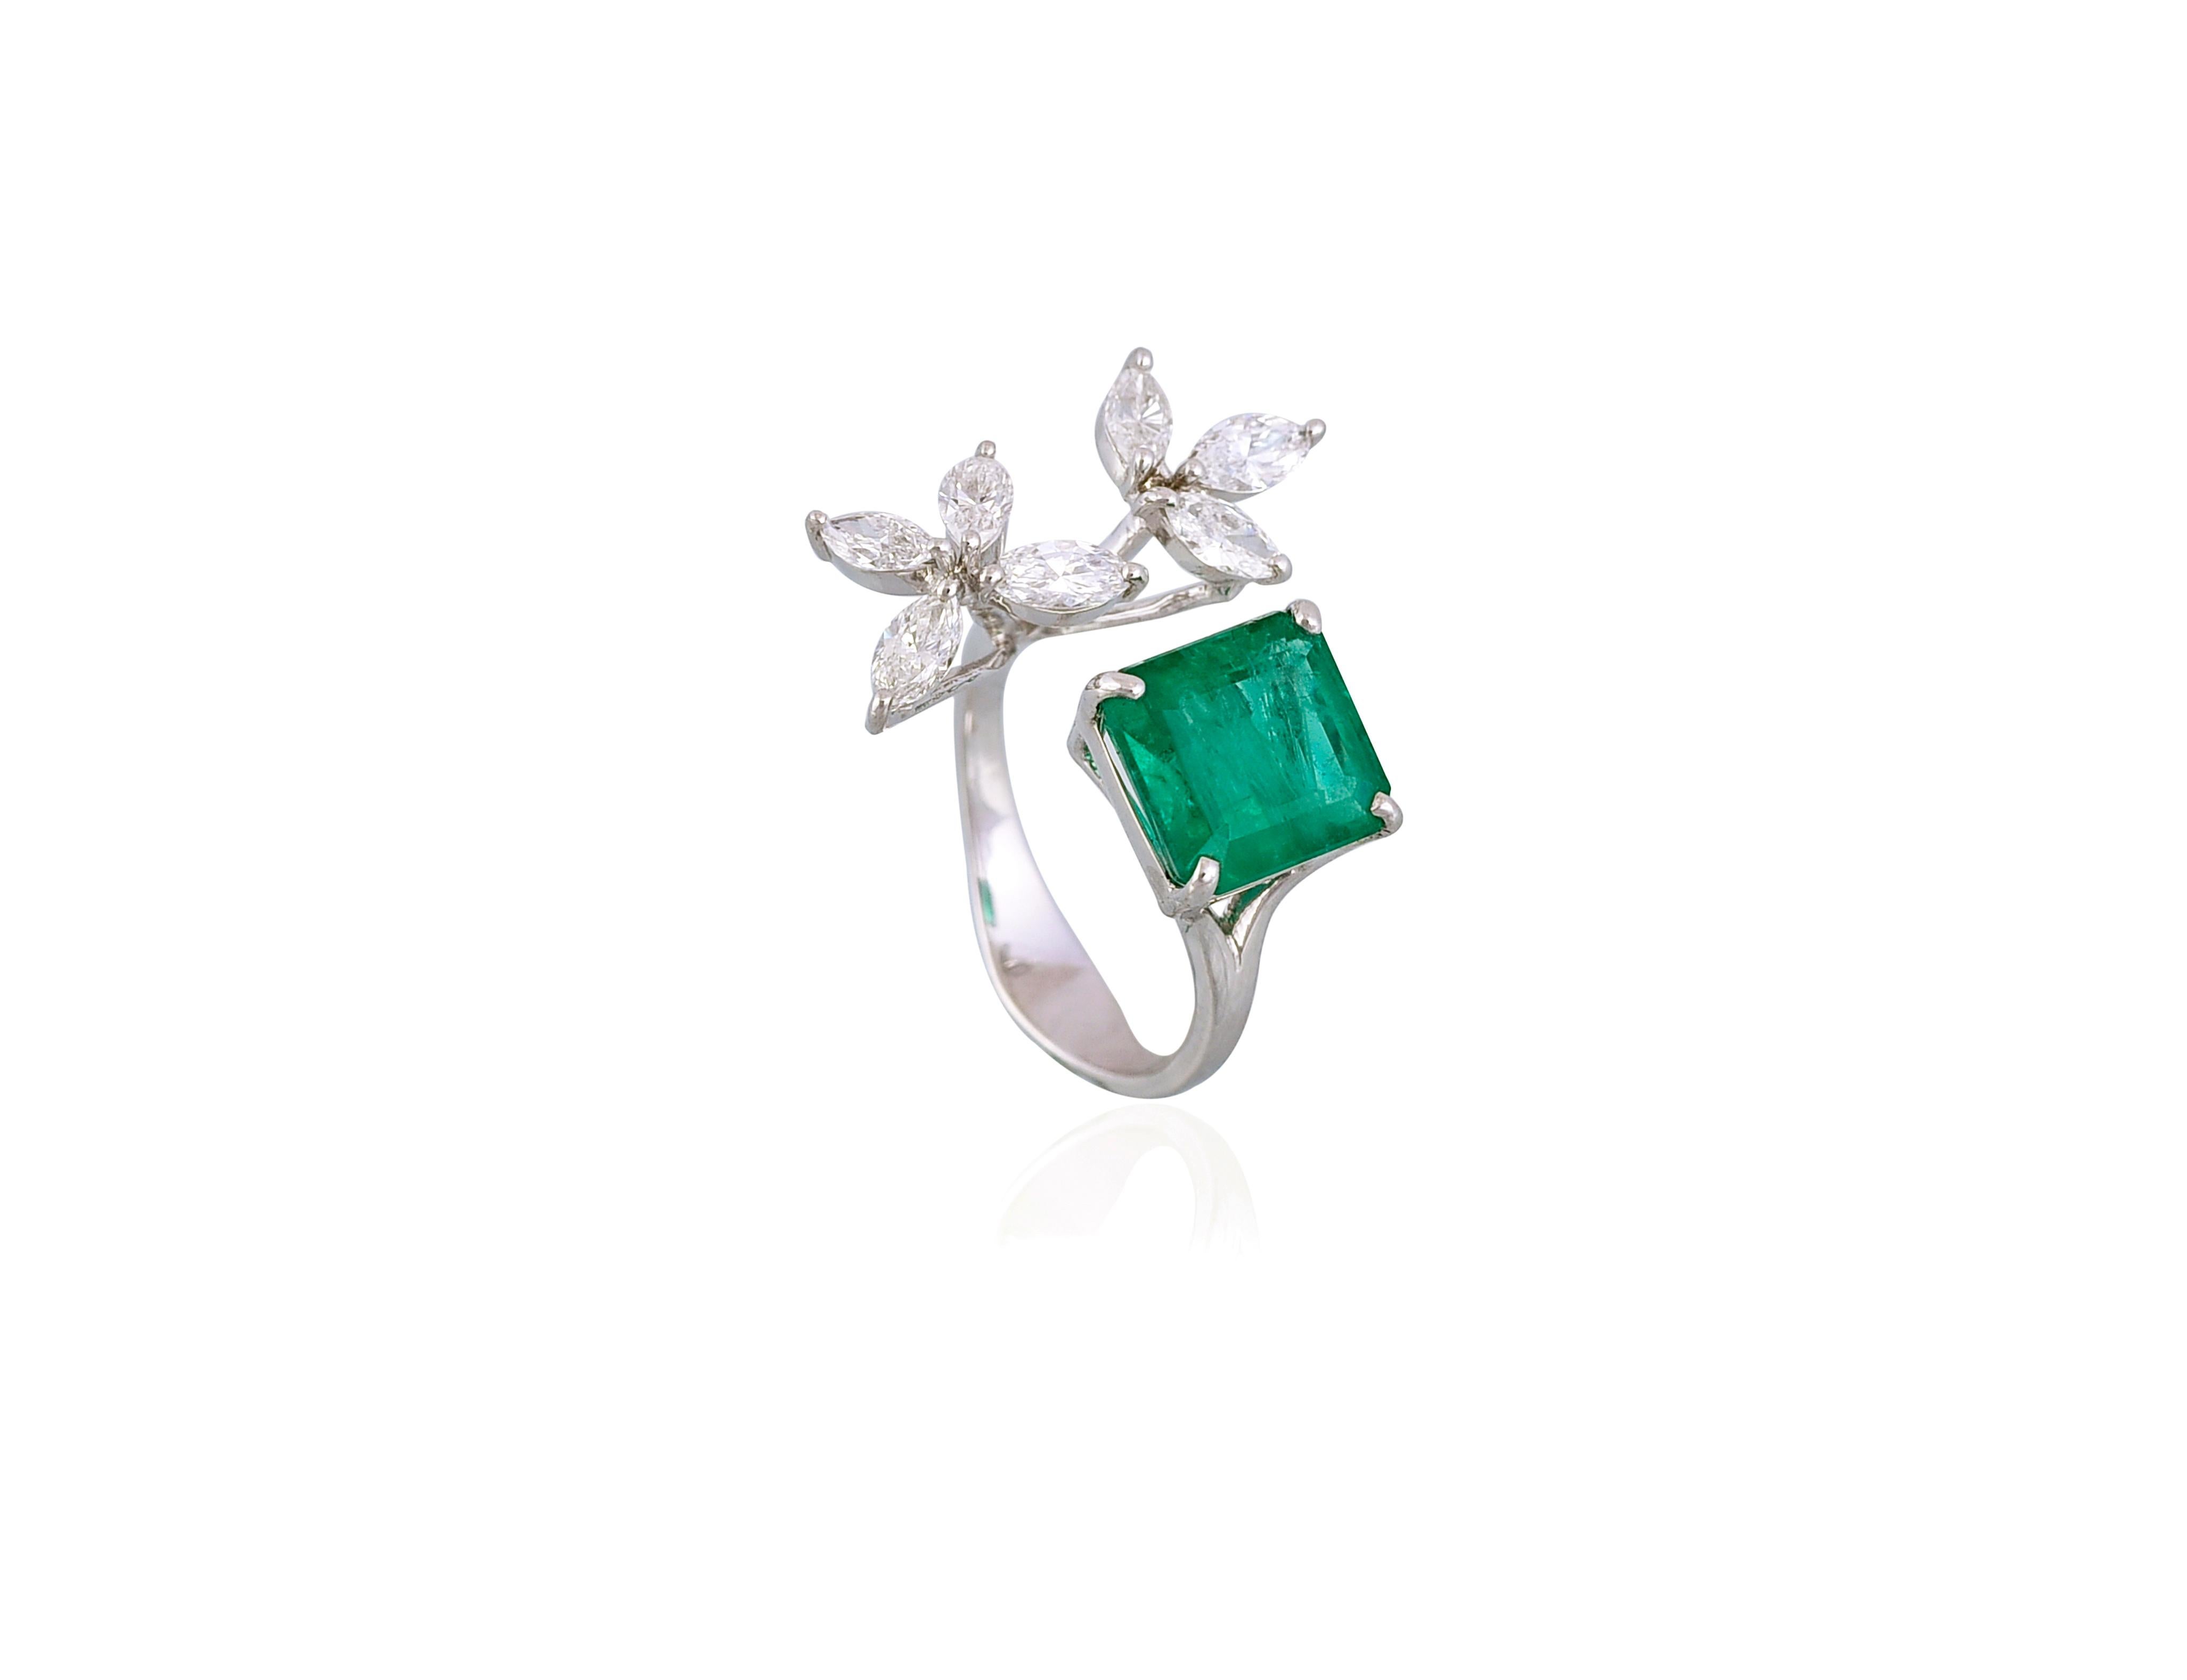 A very chic Emerald & Diamonds Cocktail Ring set in 18K White Gold & Marquise Diamonds. The weight of the Emerald is 4.23 carats. The Emerald originates from Zambia and is completely natural without any treatment. The weight of the diamonds is 1.170